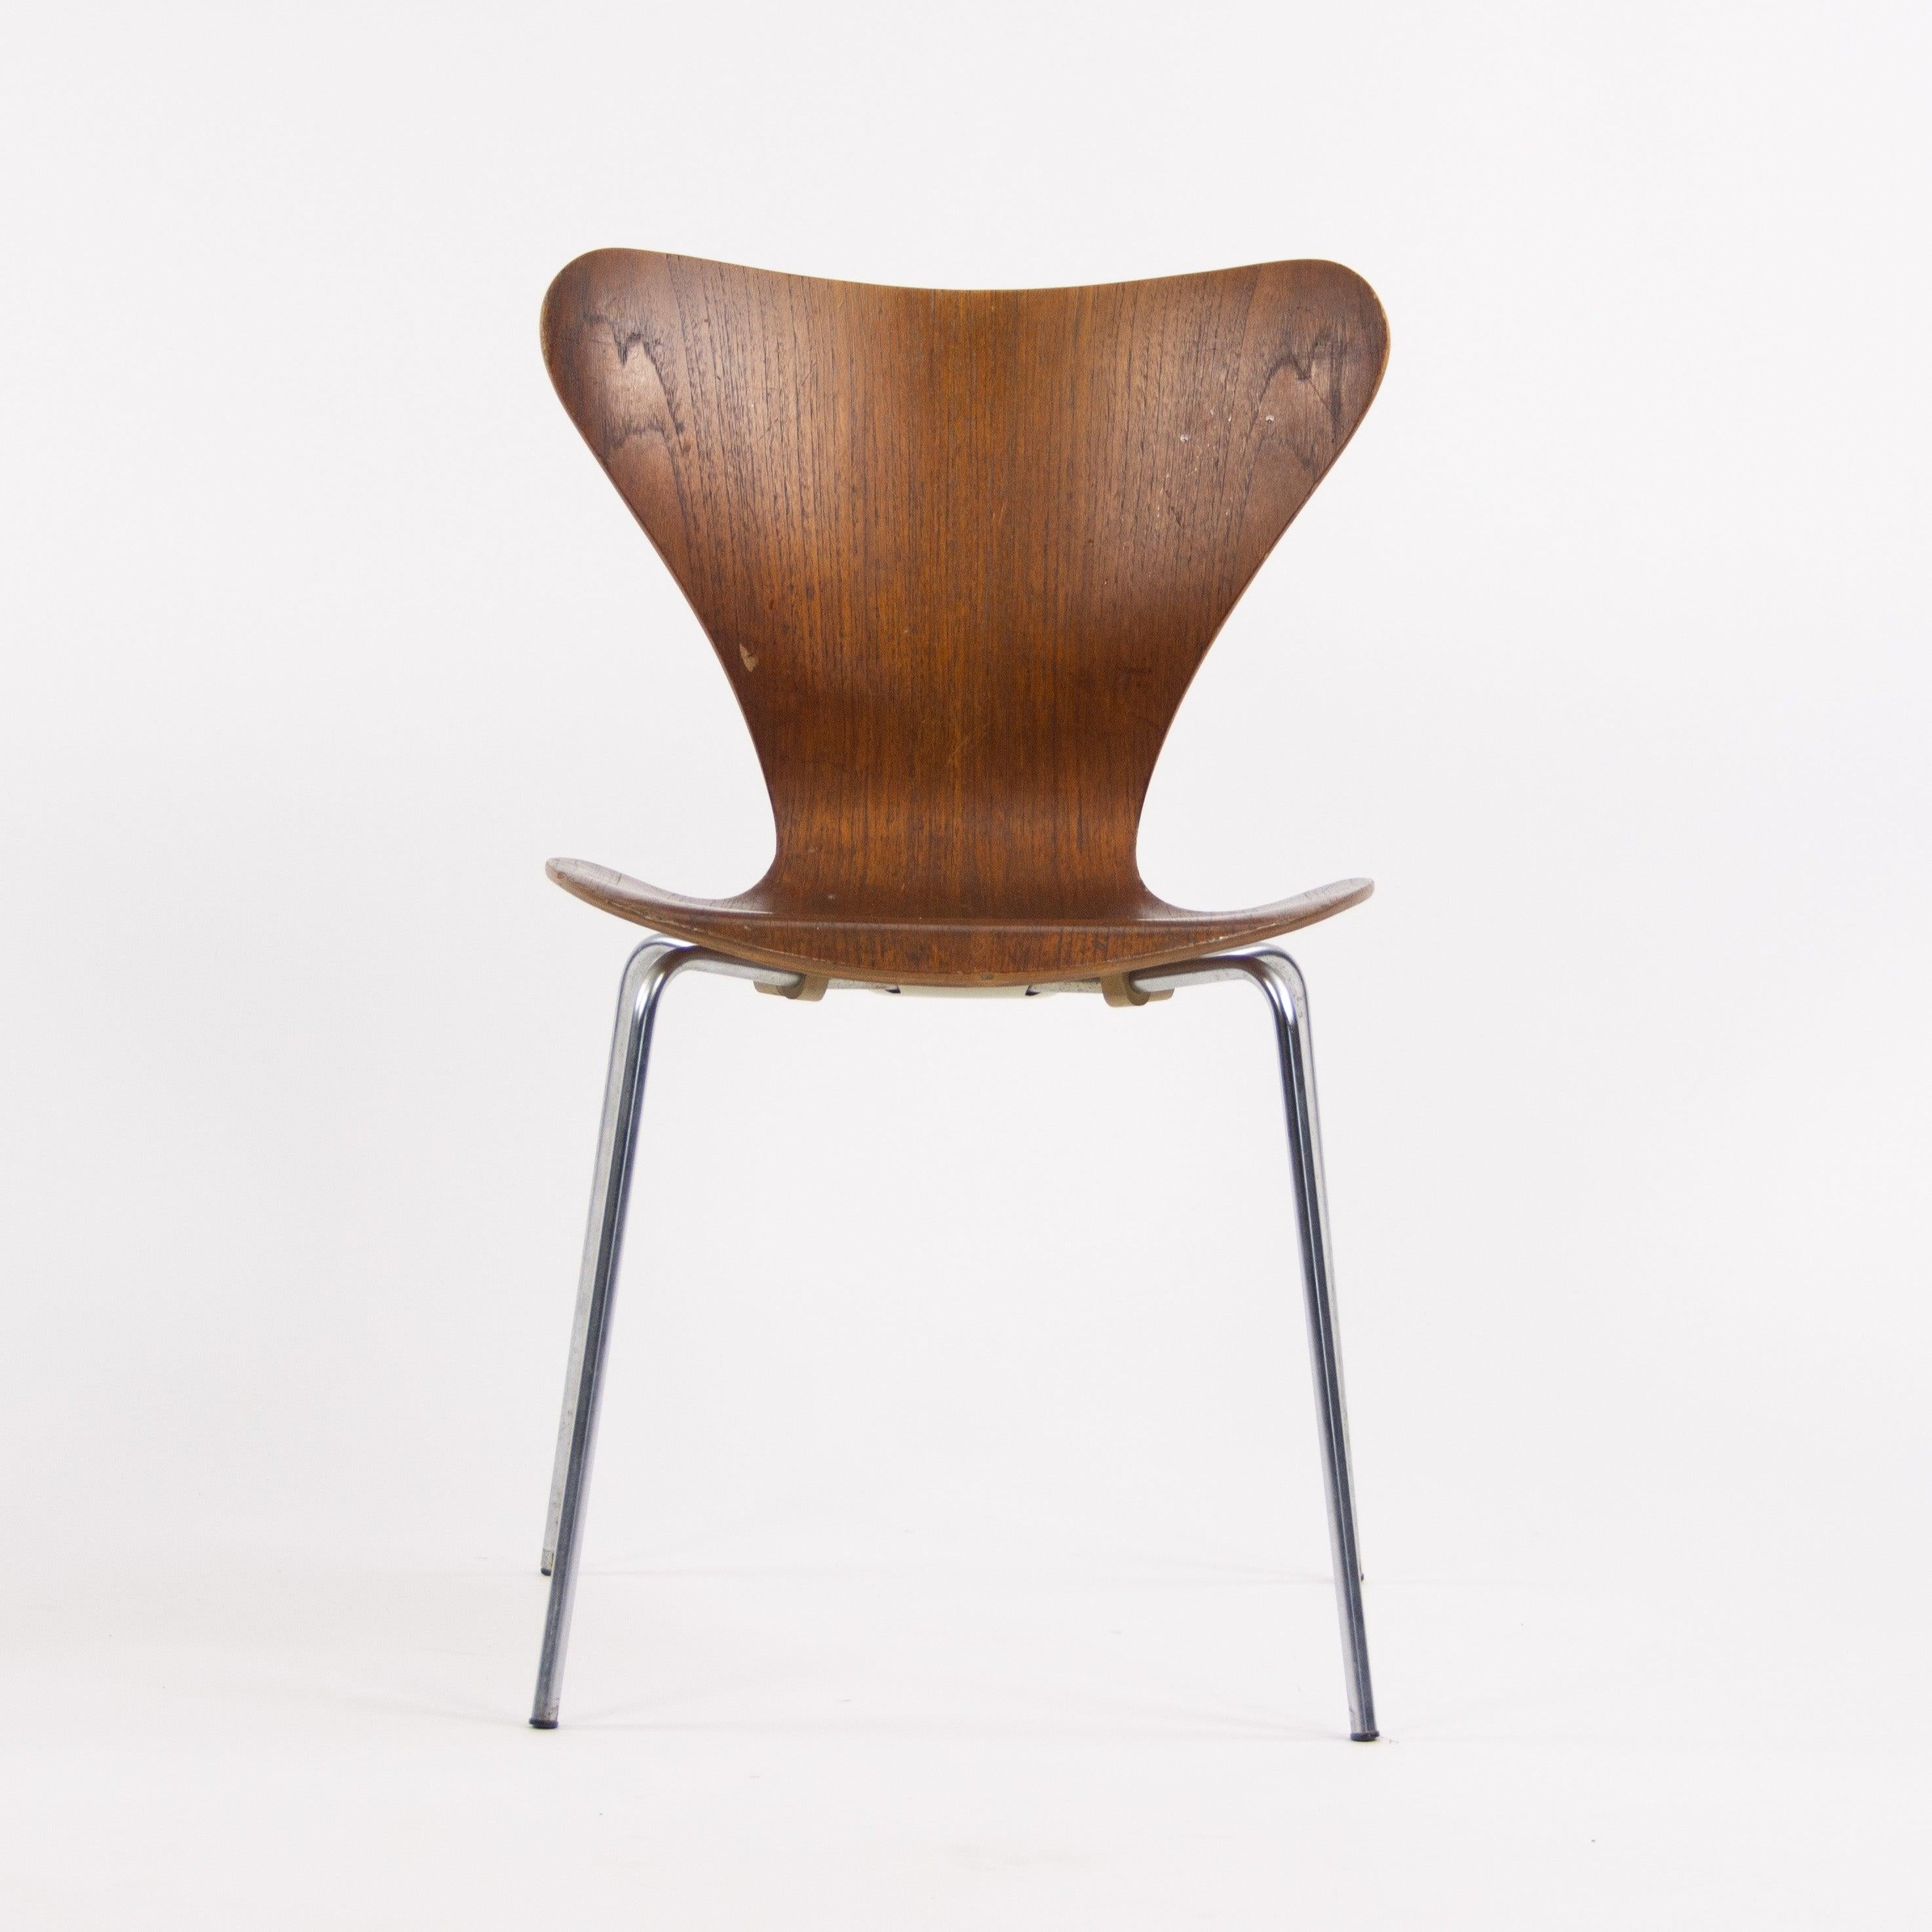 Listed for sale is a set of four vintage Arne Jacobsen Series 7 chairs with teak finish. These examples were produced by Fritz Hansen in the 1960's and are fantastic original examples.

The chairs show some wear to the plywood uppers. See